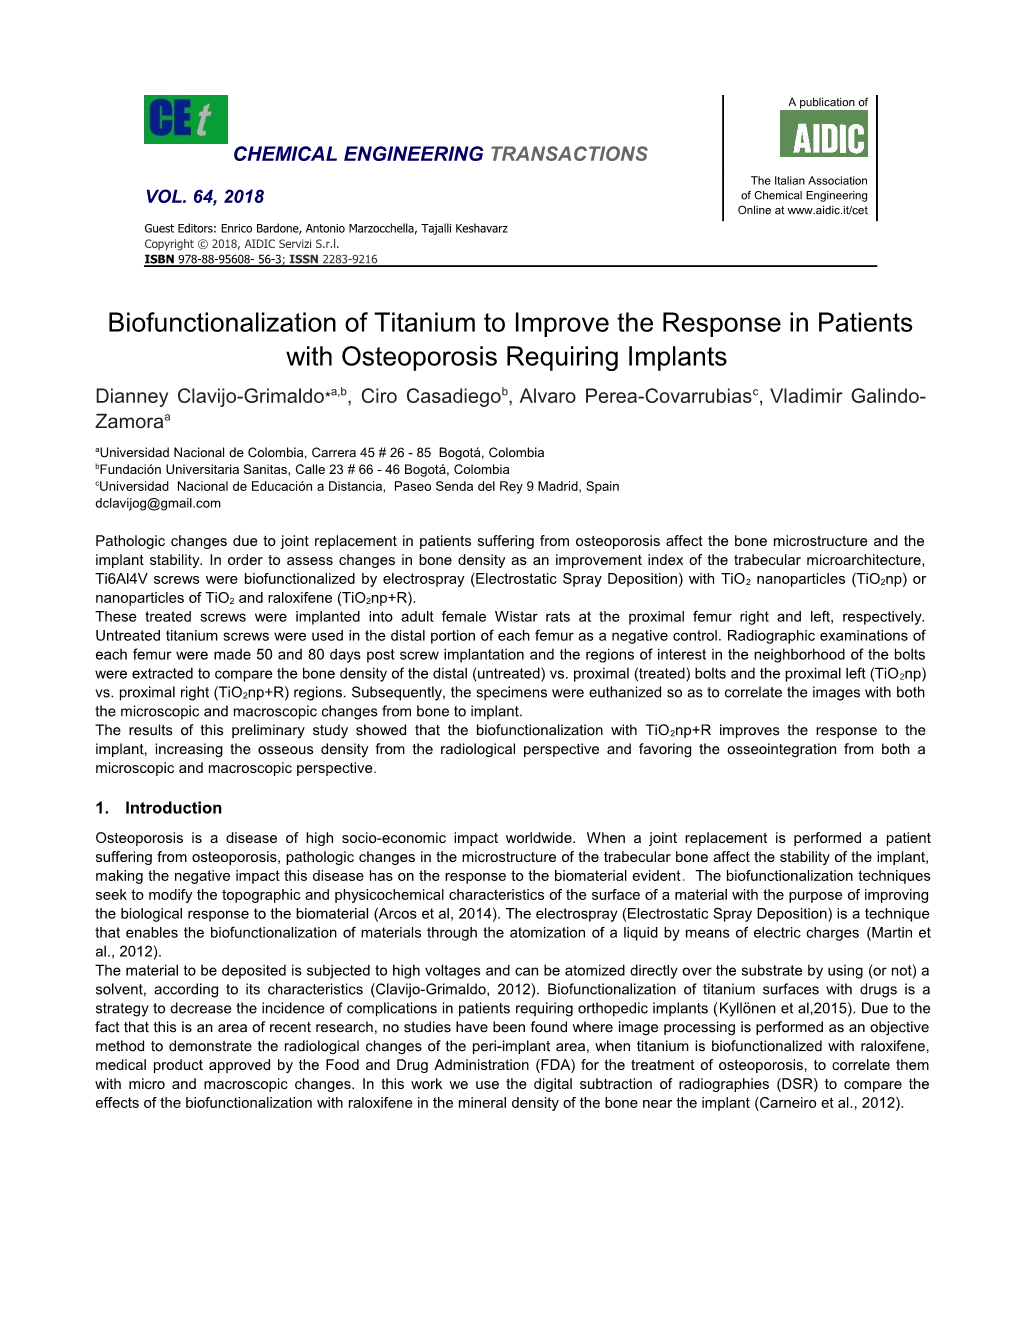 Biofunctionalization of Titanium to Improve the Response in Patients with Osteoporosis